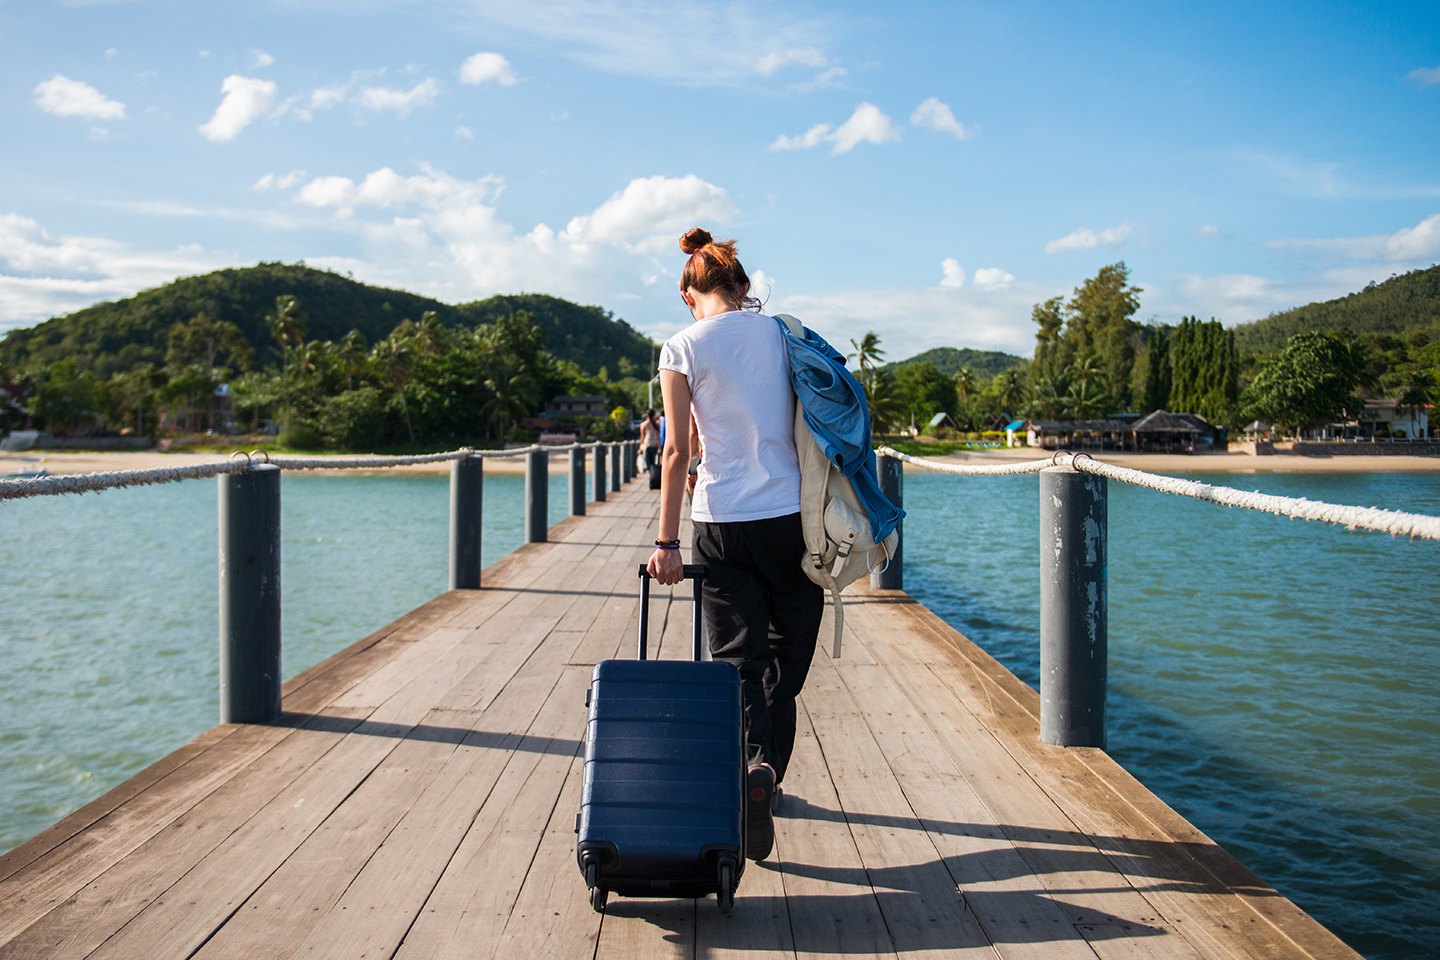 The Mystery of the Missing Suitcases: Why Don't You See Them on Fishing Boats? V. Suitcases and Safety